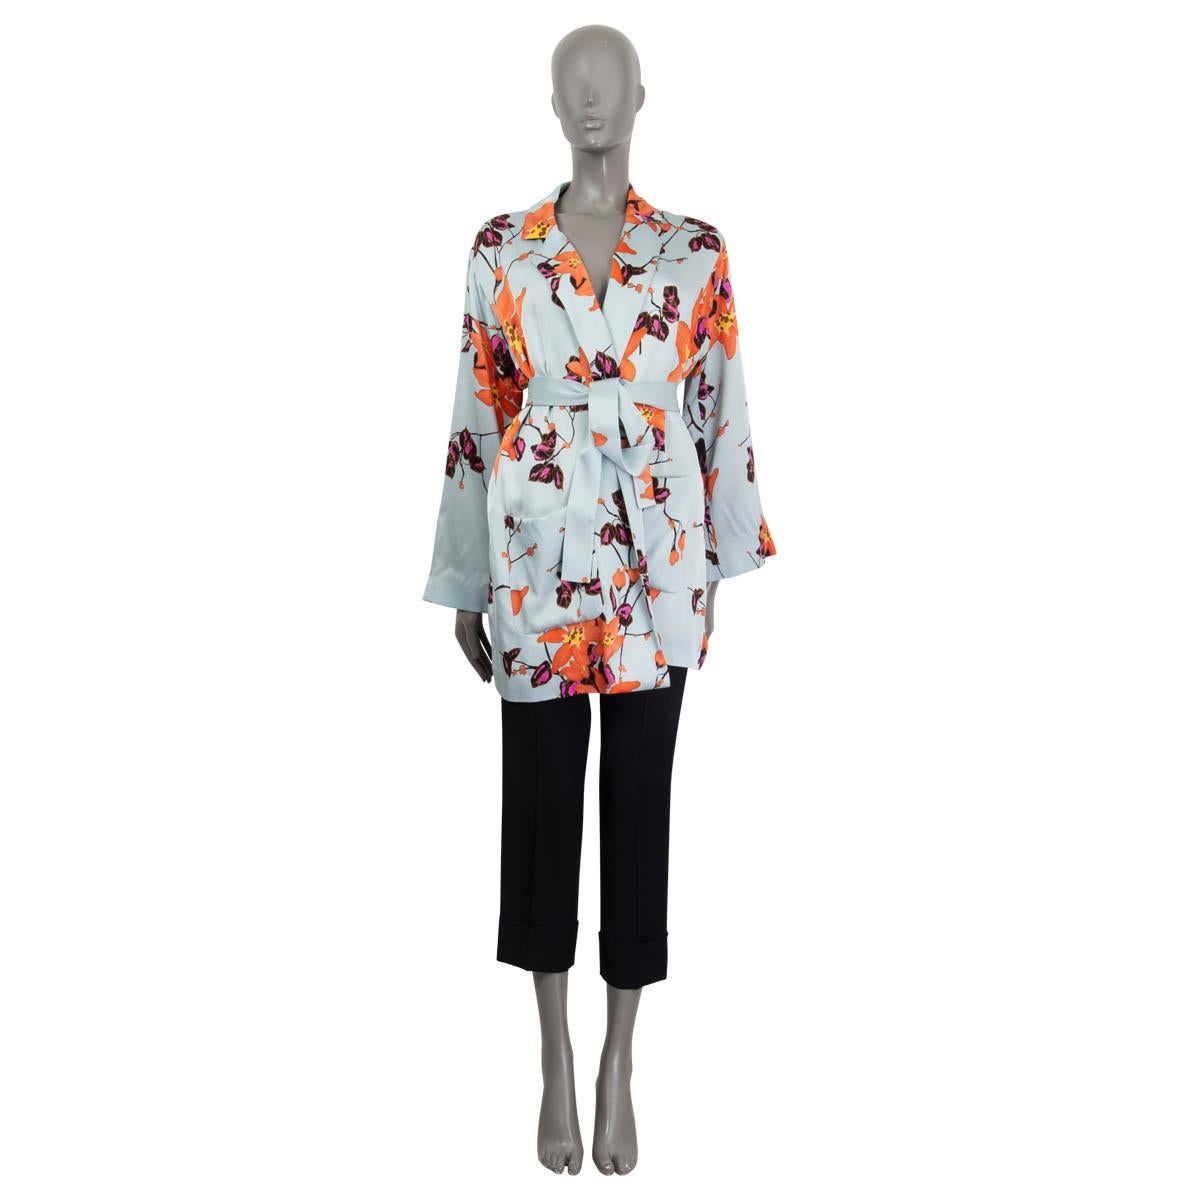 100% authentic Etro Pre-Fall 2018 lilies print soft jacket in baby blue, coral, fuchsia, brown and black viscose (100%). Features two patch pockets on the front and a detachable belt. Lined in peach viscose (70%) and silk (30%). Brand new, with